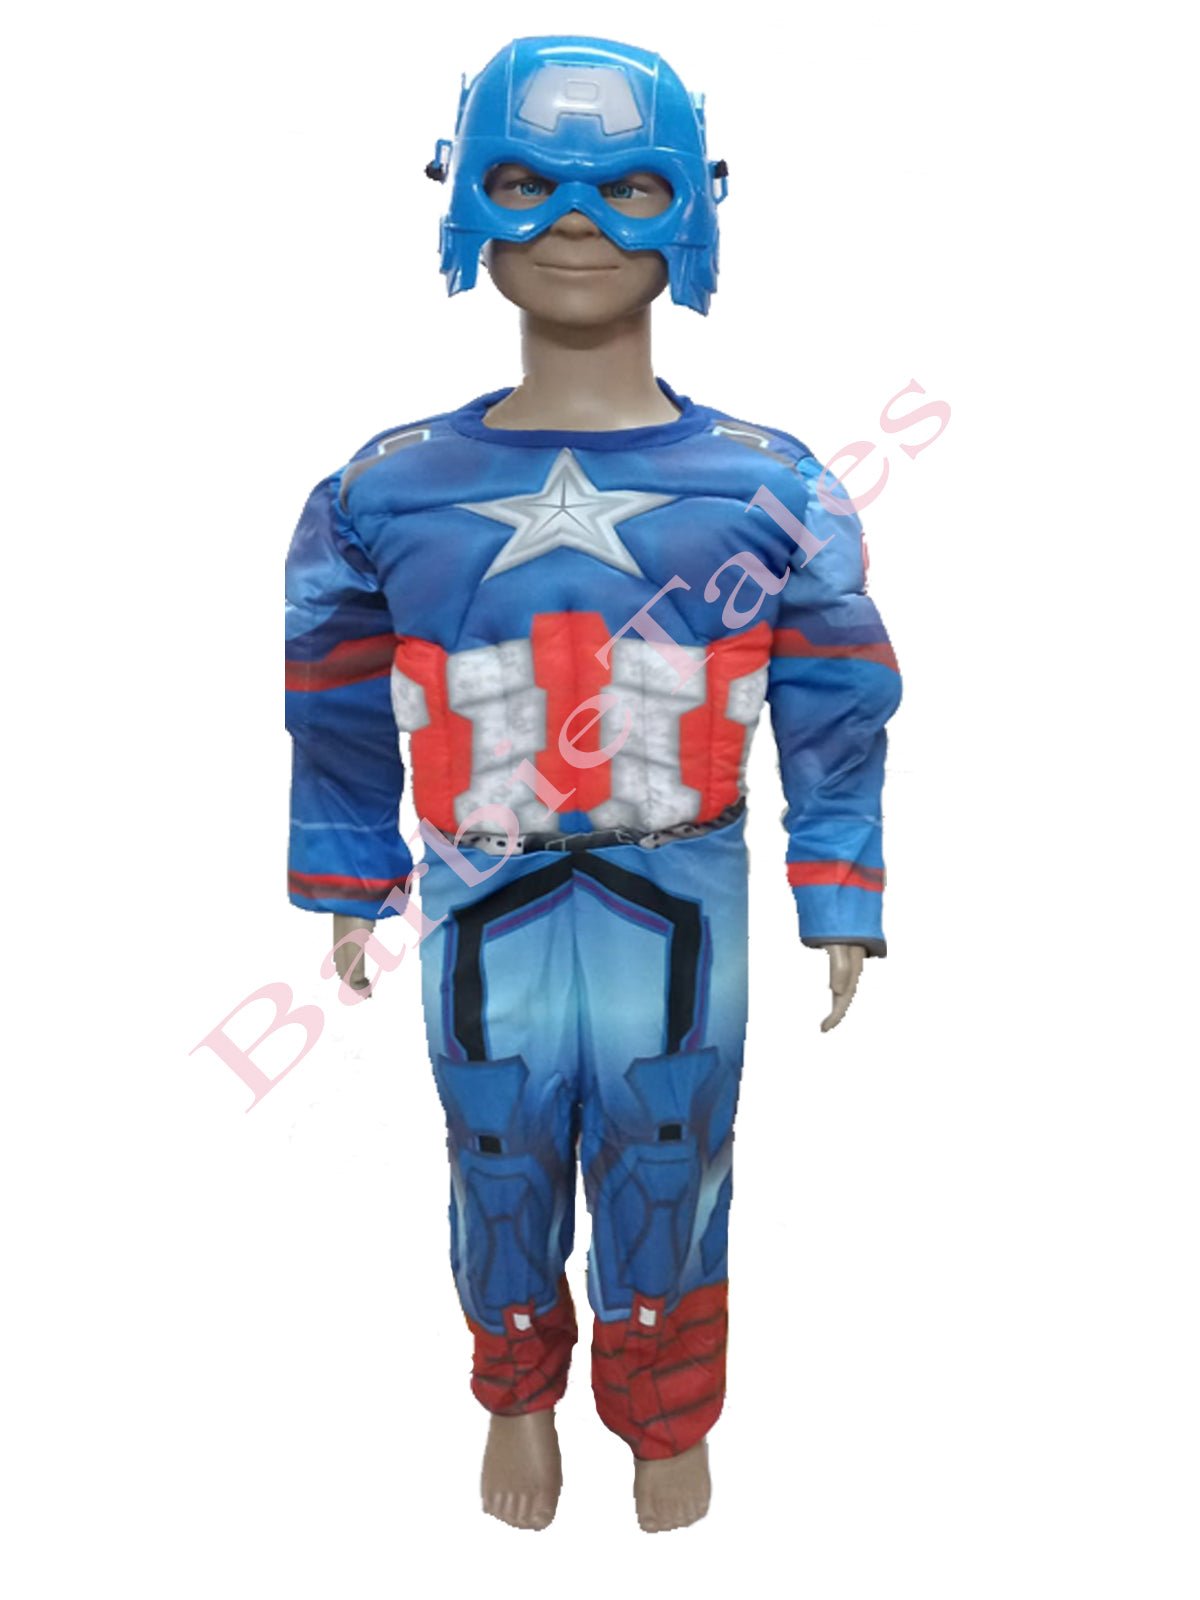 Buy FancyDressWale American Soldier Muscles Kids Dress (3-4 YRS(S)) Online  at Low Prices in India - Amazon.in